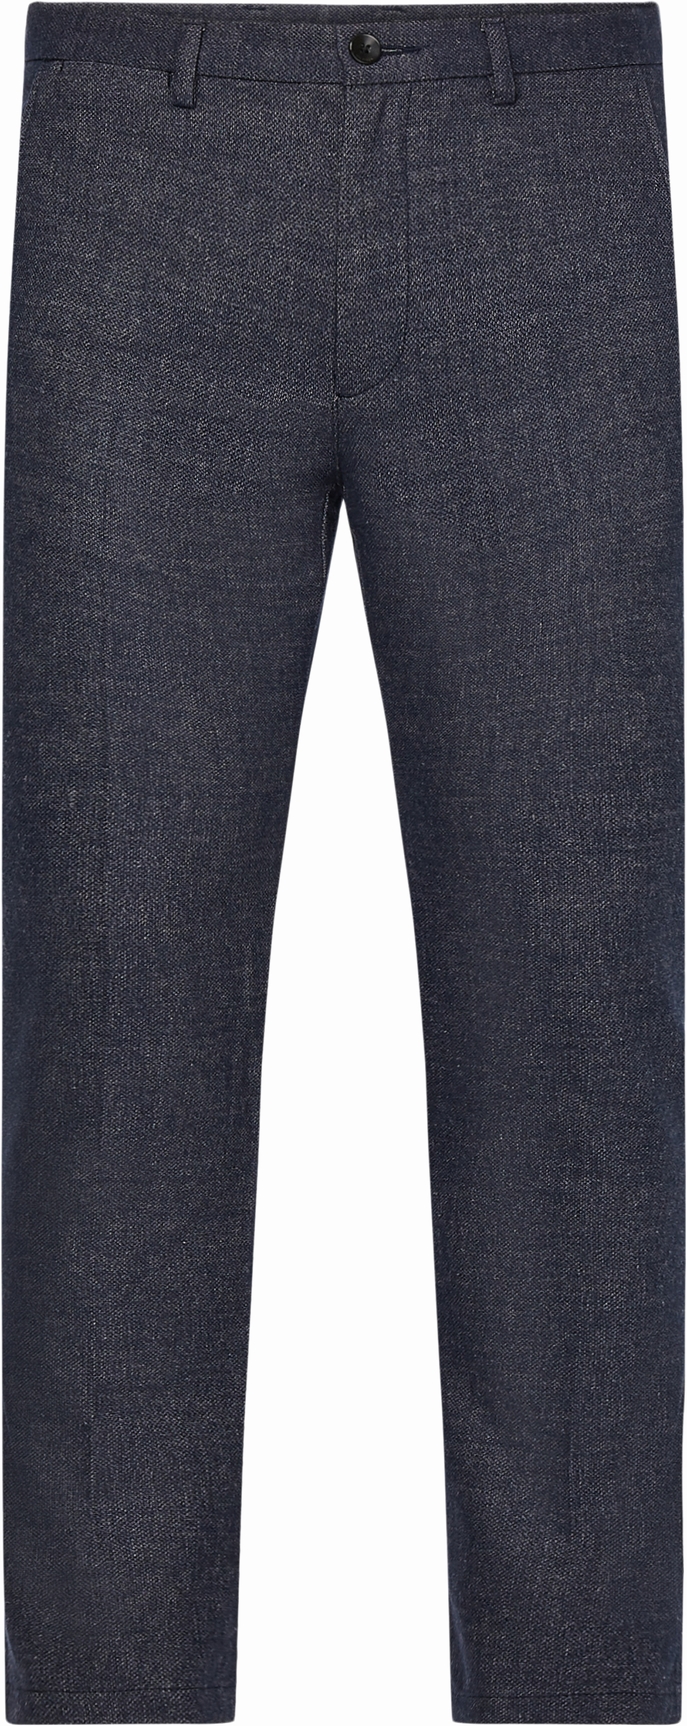 CHINO BLEECKER BRUSHED TOMMY HILFIGER